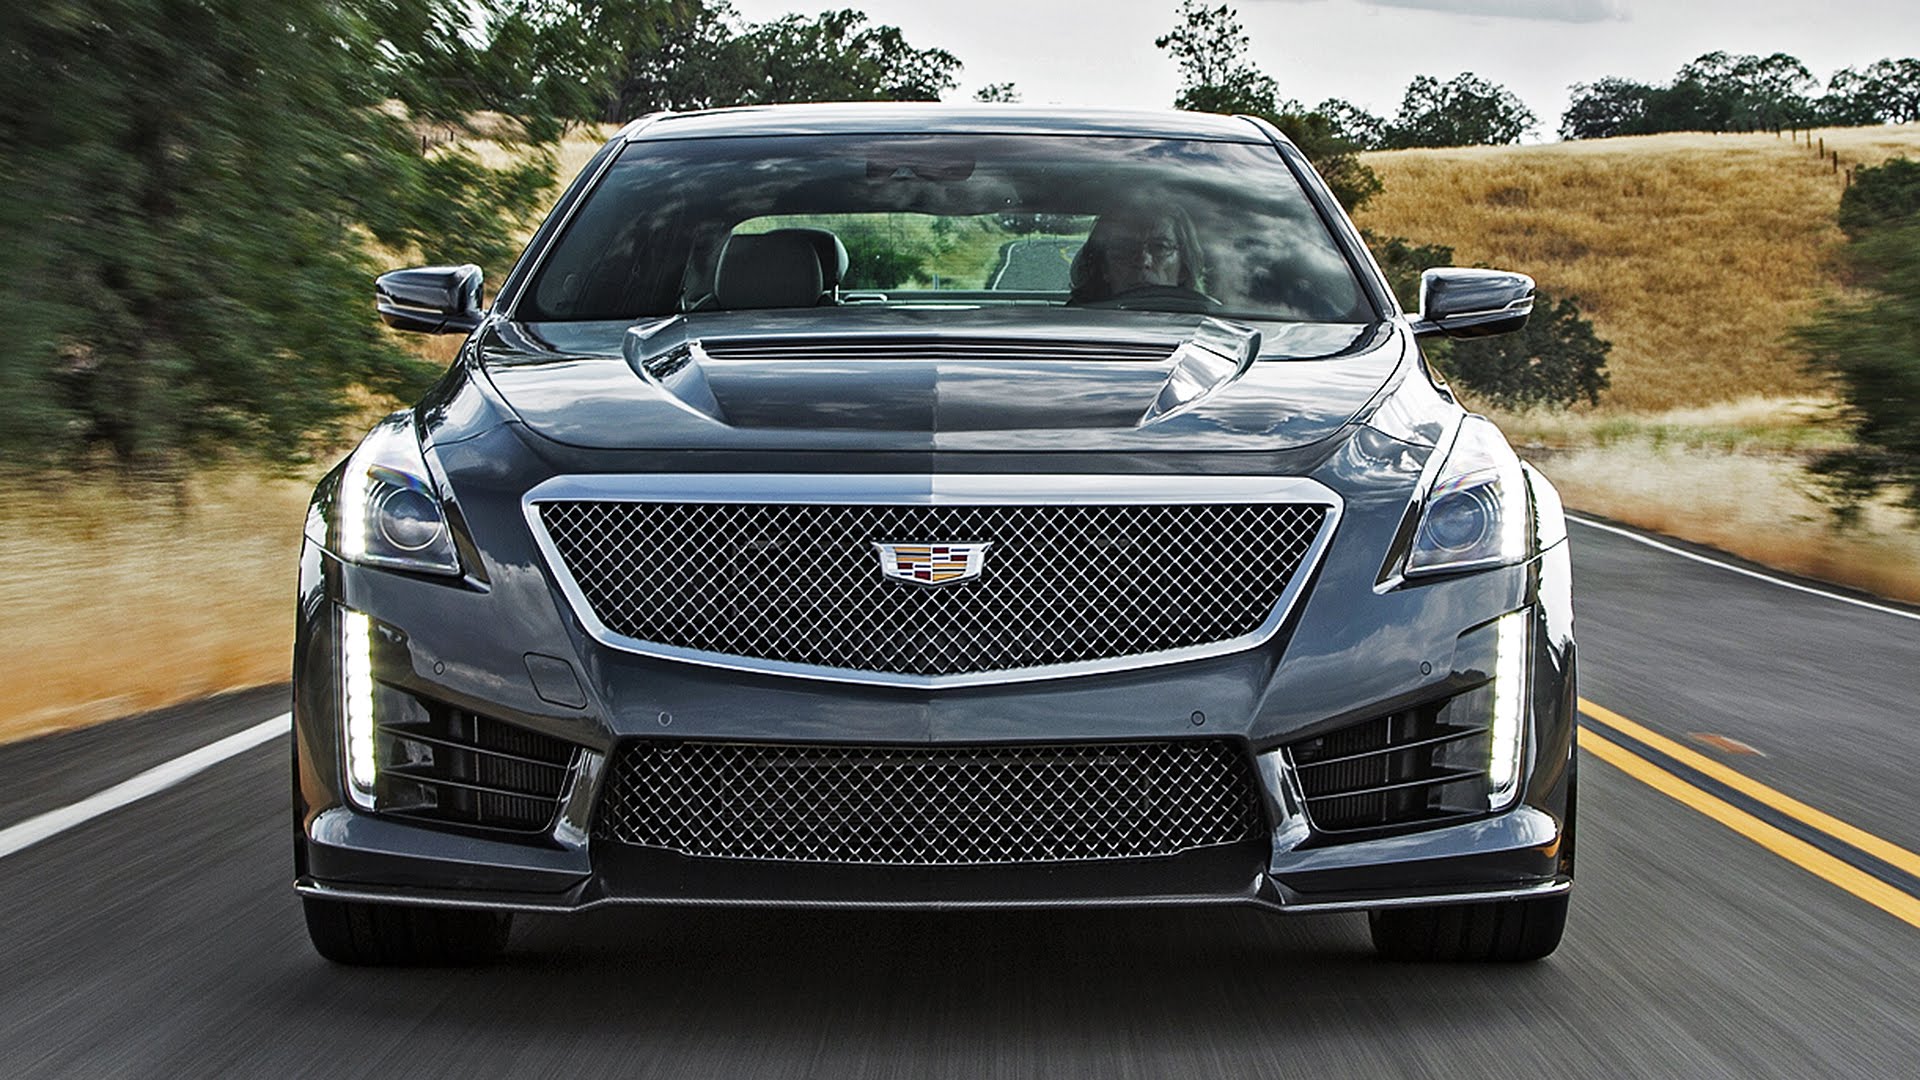 Cadillac CTS-V Backgrounds, Compatible - PC, Mobile, Gadgets| 1920x1080 px